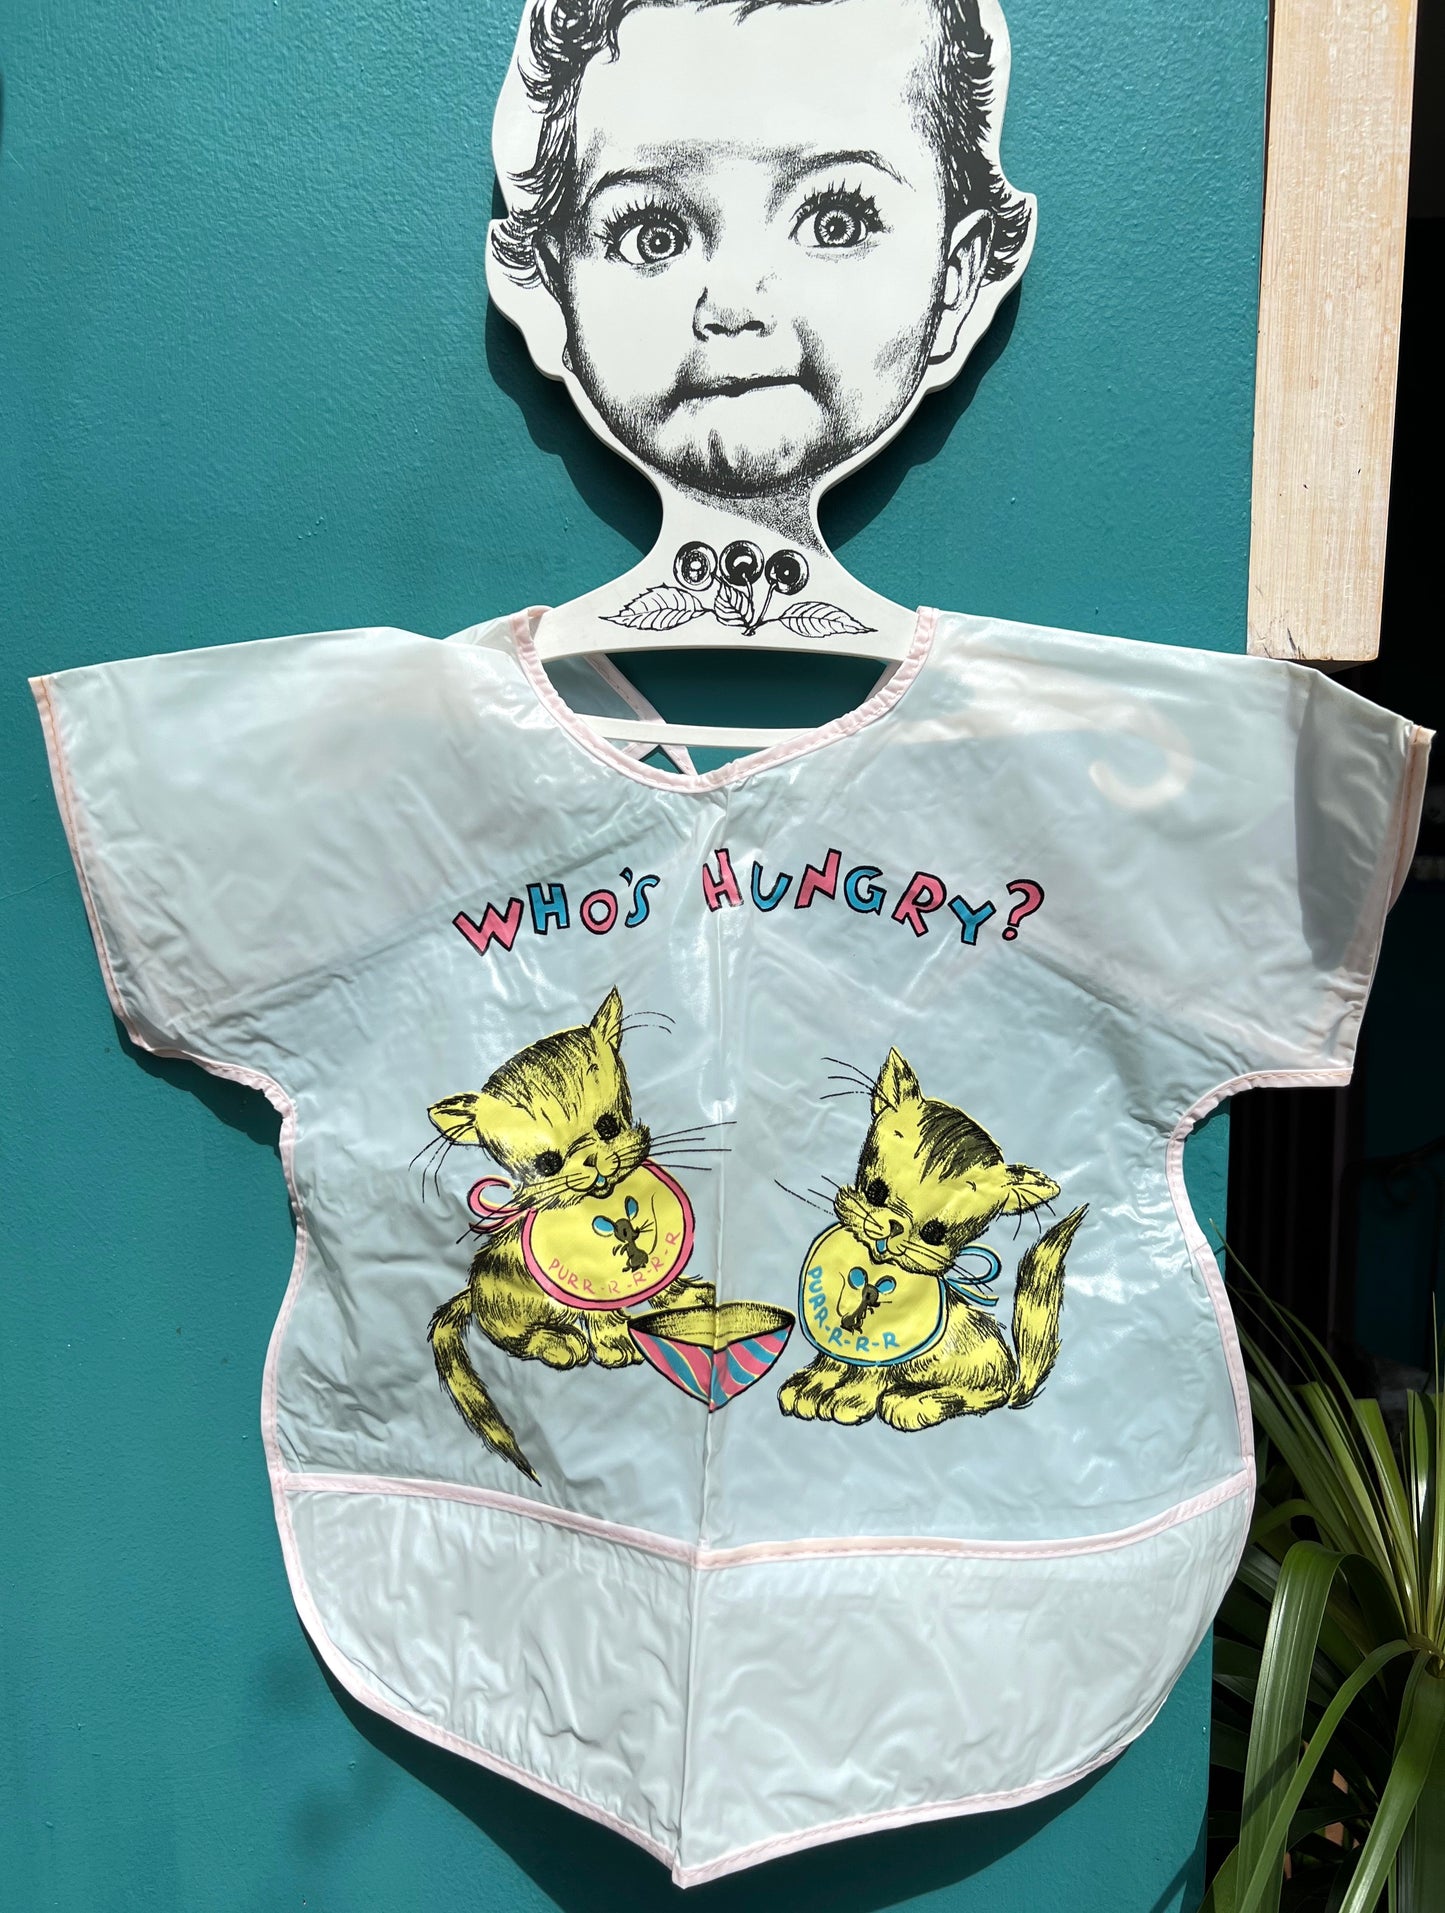 Who's Hungry ? 1950s Vinyl Bib with Sleeves and Pocket